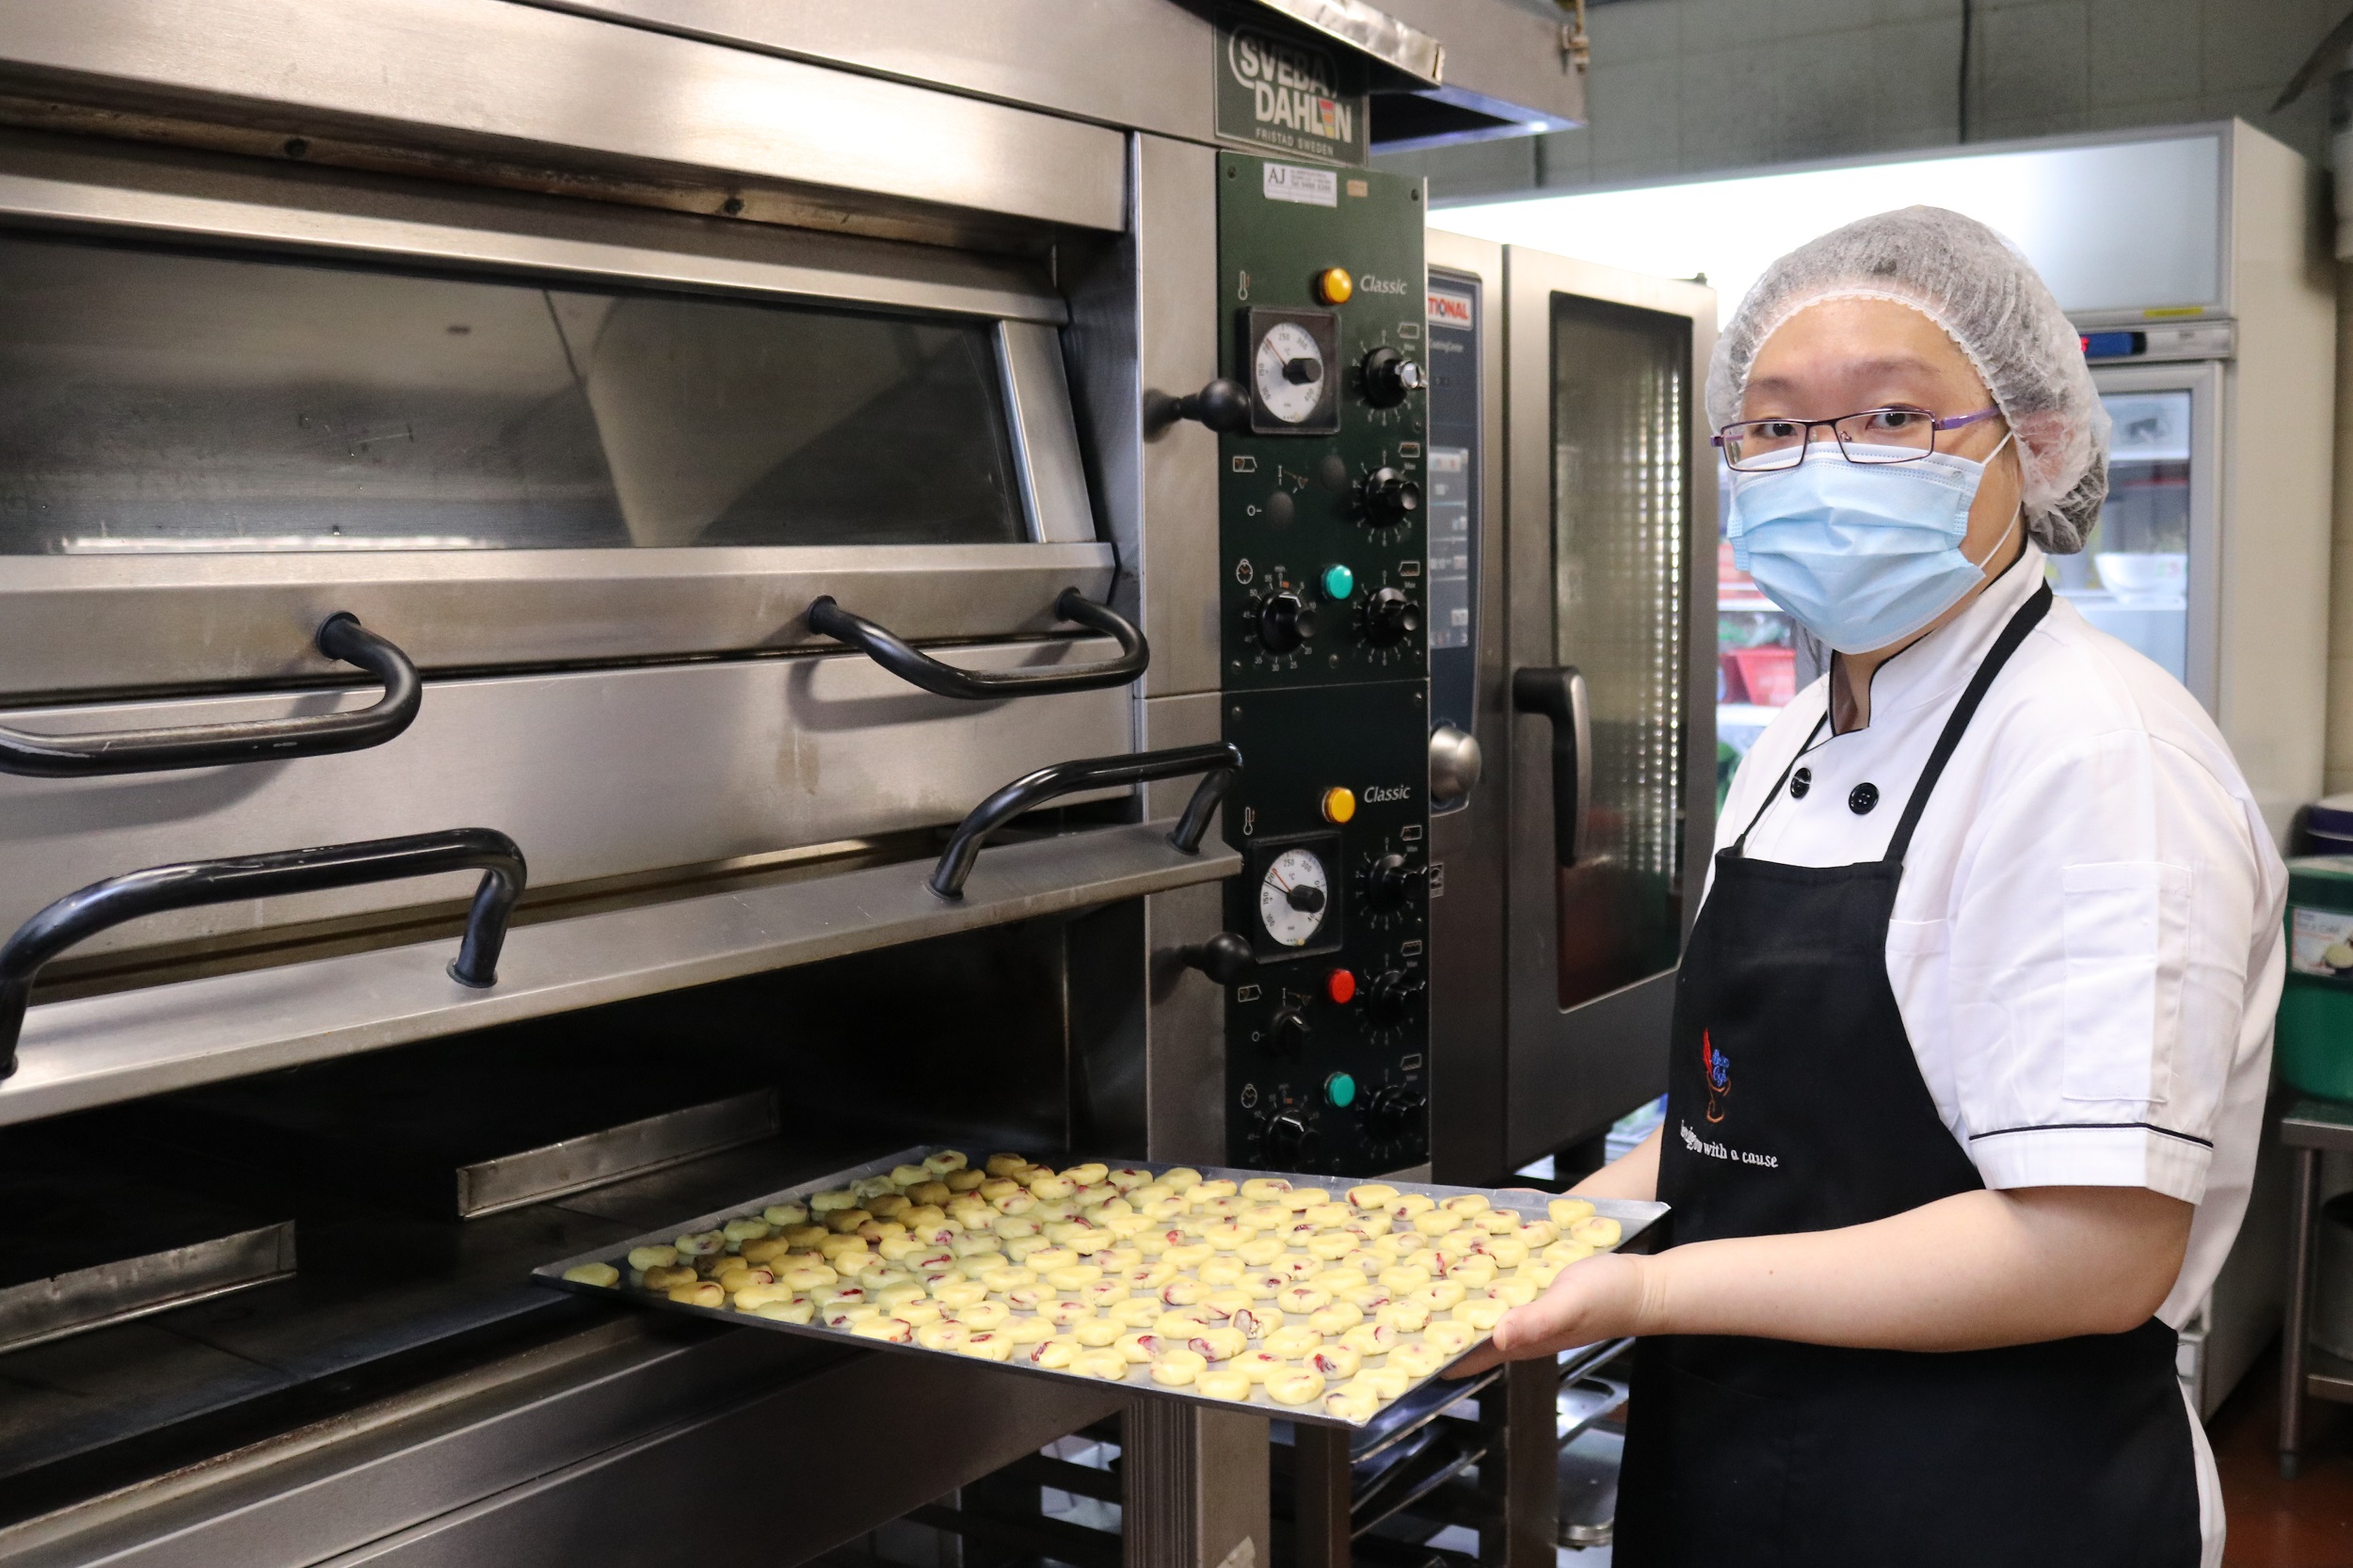 Shirley Heng from Metta Cafe posing with a plate of pastries to be baked in the kitchen